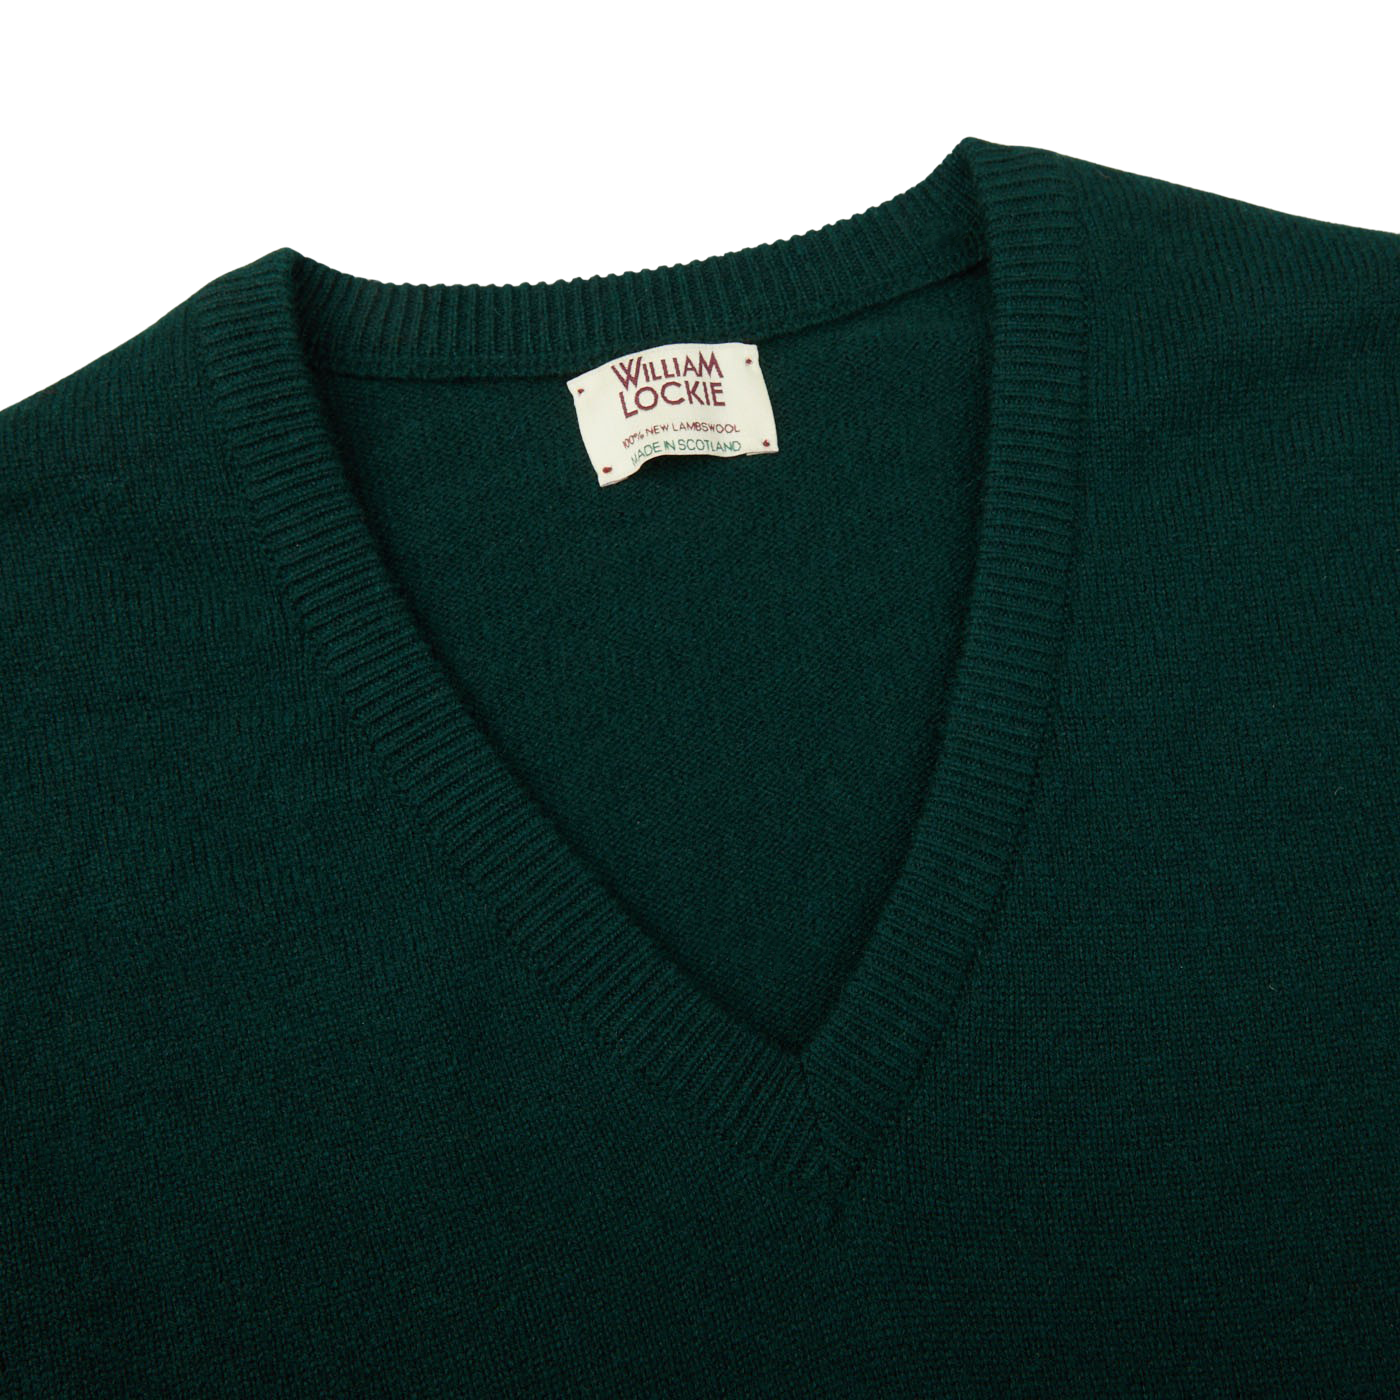 A Tartan Green Lambswool V-Neck Sweater on a white background, made by William Lockie.